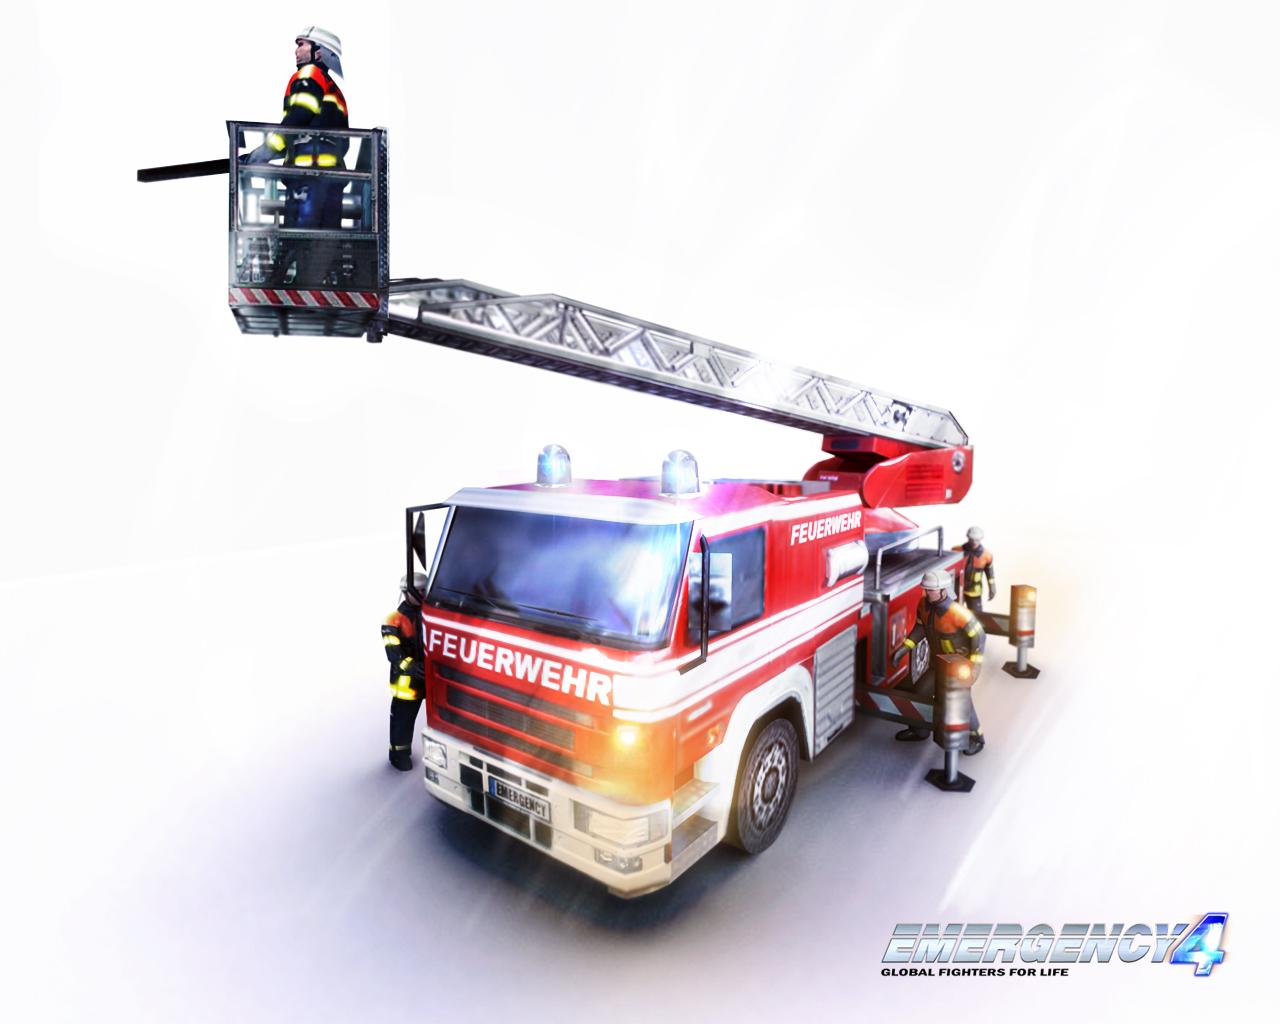 First Responders (2006) promotional art